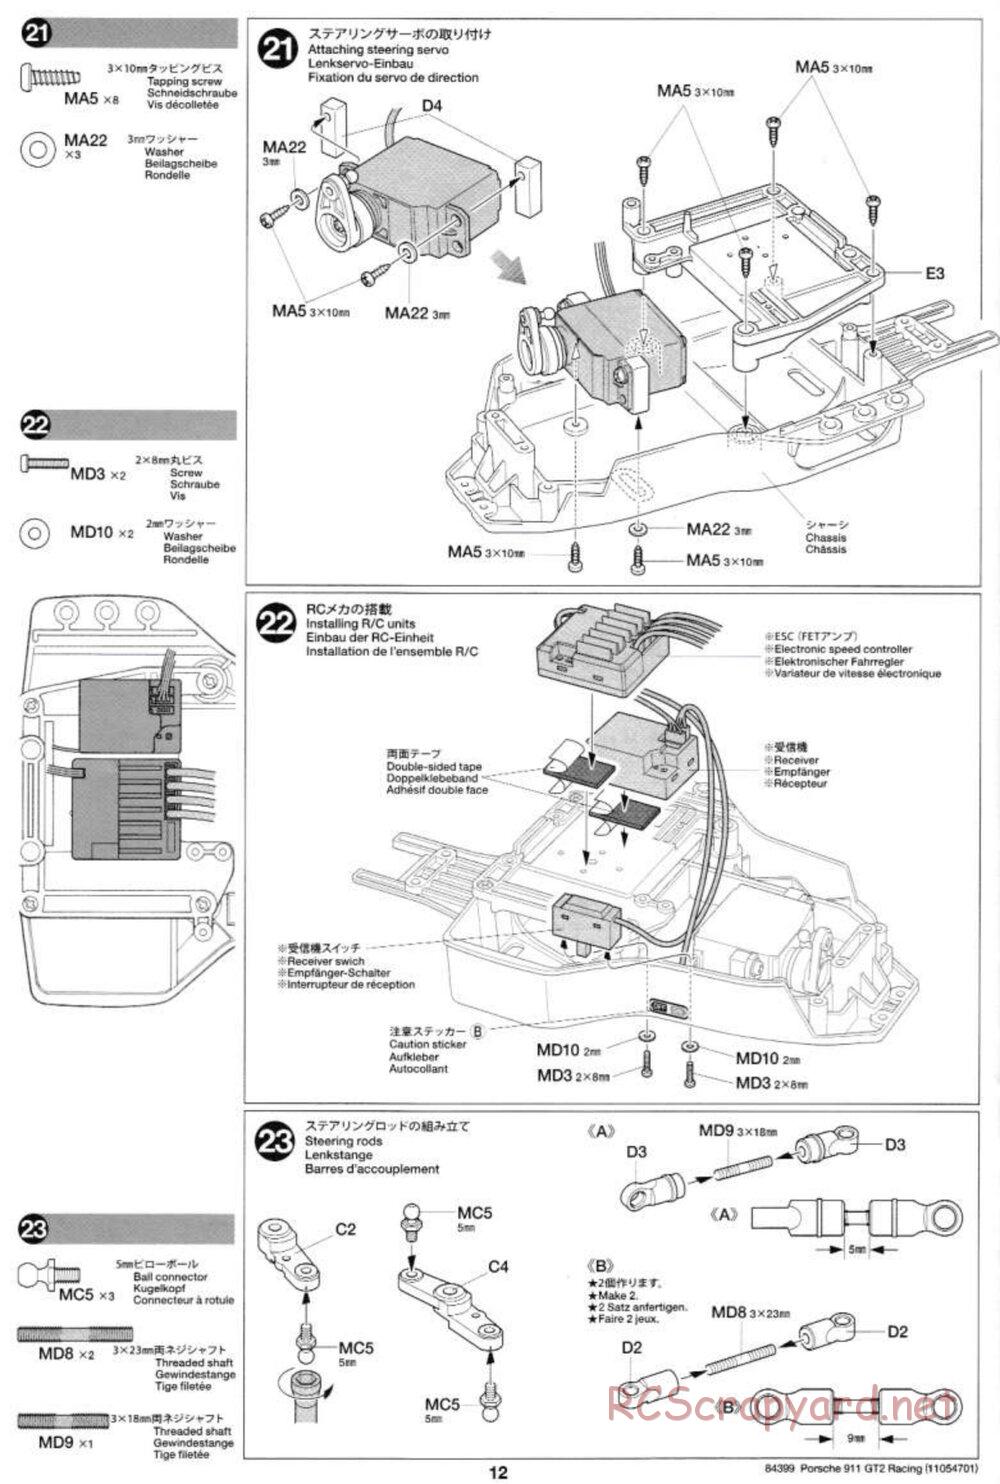 Tamiya - Porsche 911 GT2 Racing - TA-02SW Chassis - Manual - Page 12